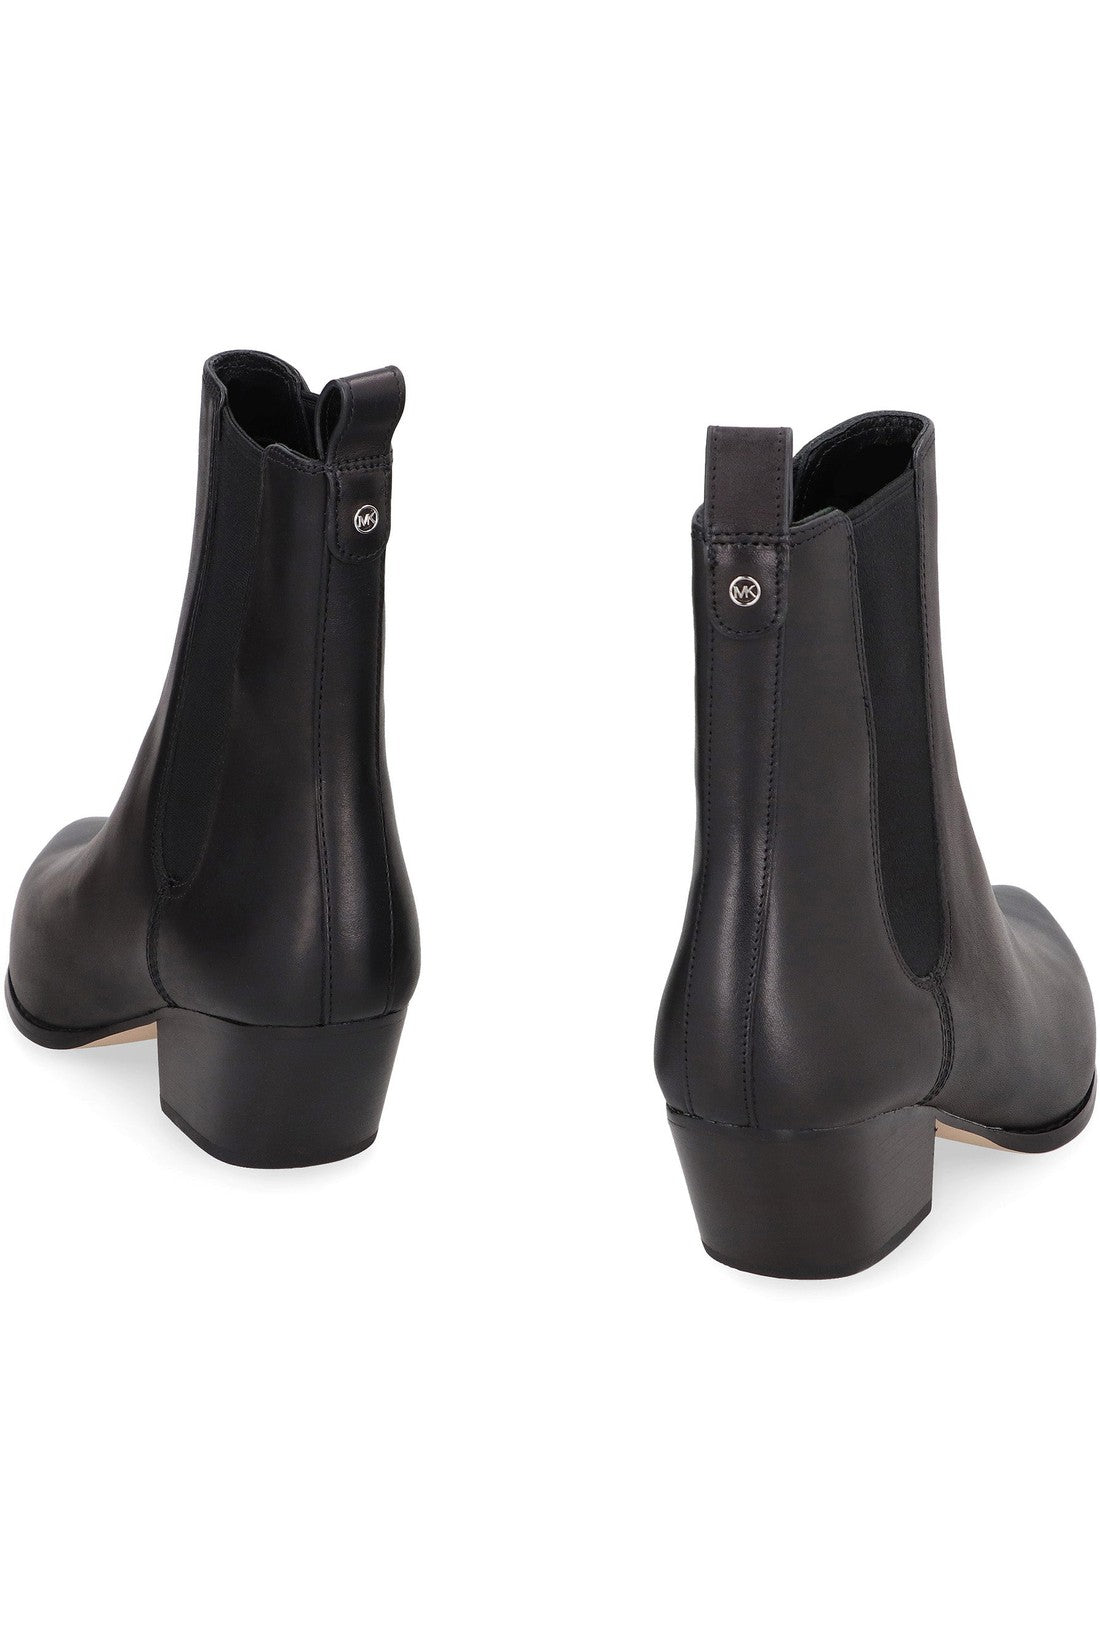 MICHAEL MICHAEL KORS-OUTLET-SALE-Kinlee leather ankle boots-ARCHIVIST